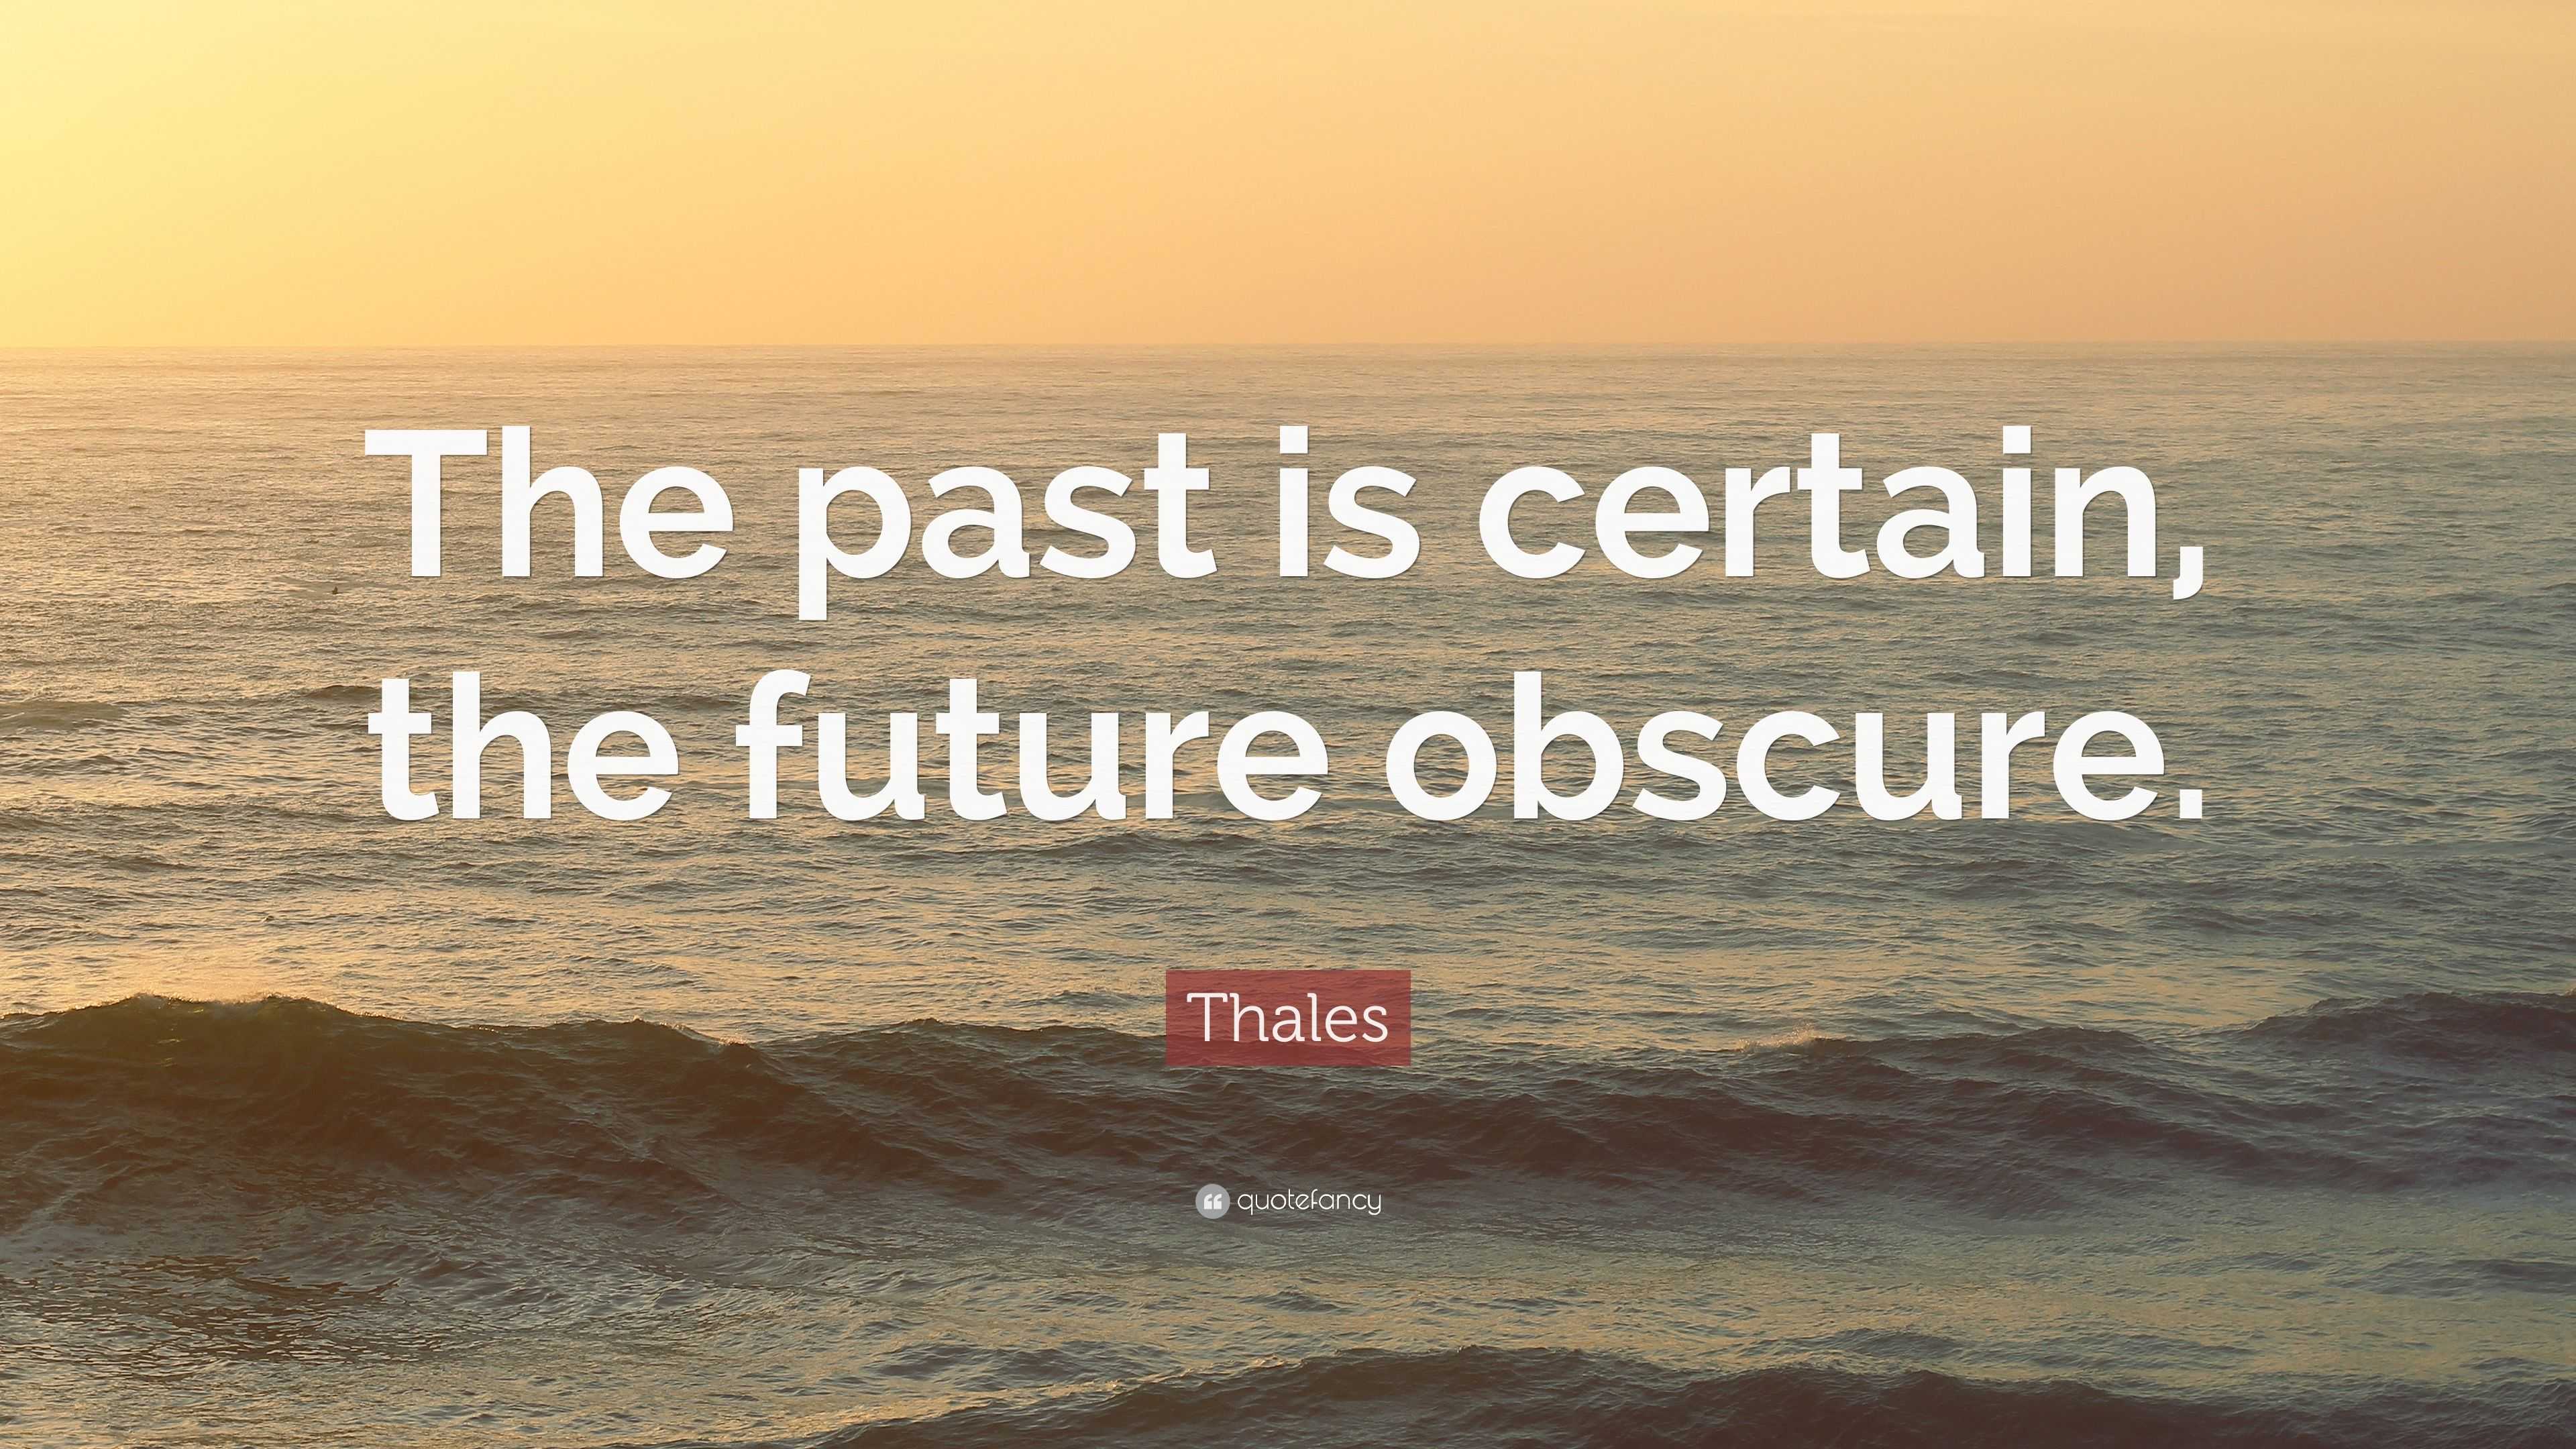 Thales Quote: “The past is certain, the future obscure.”